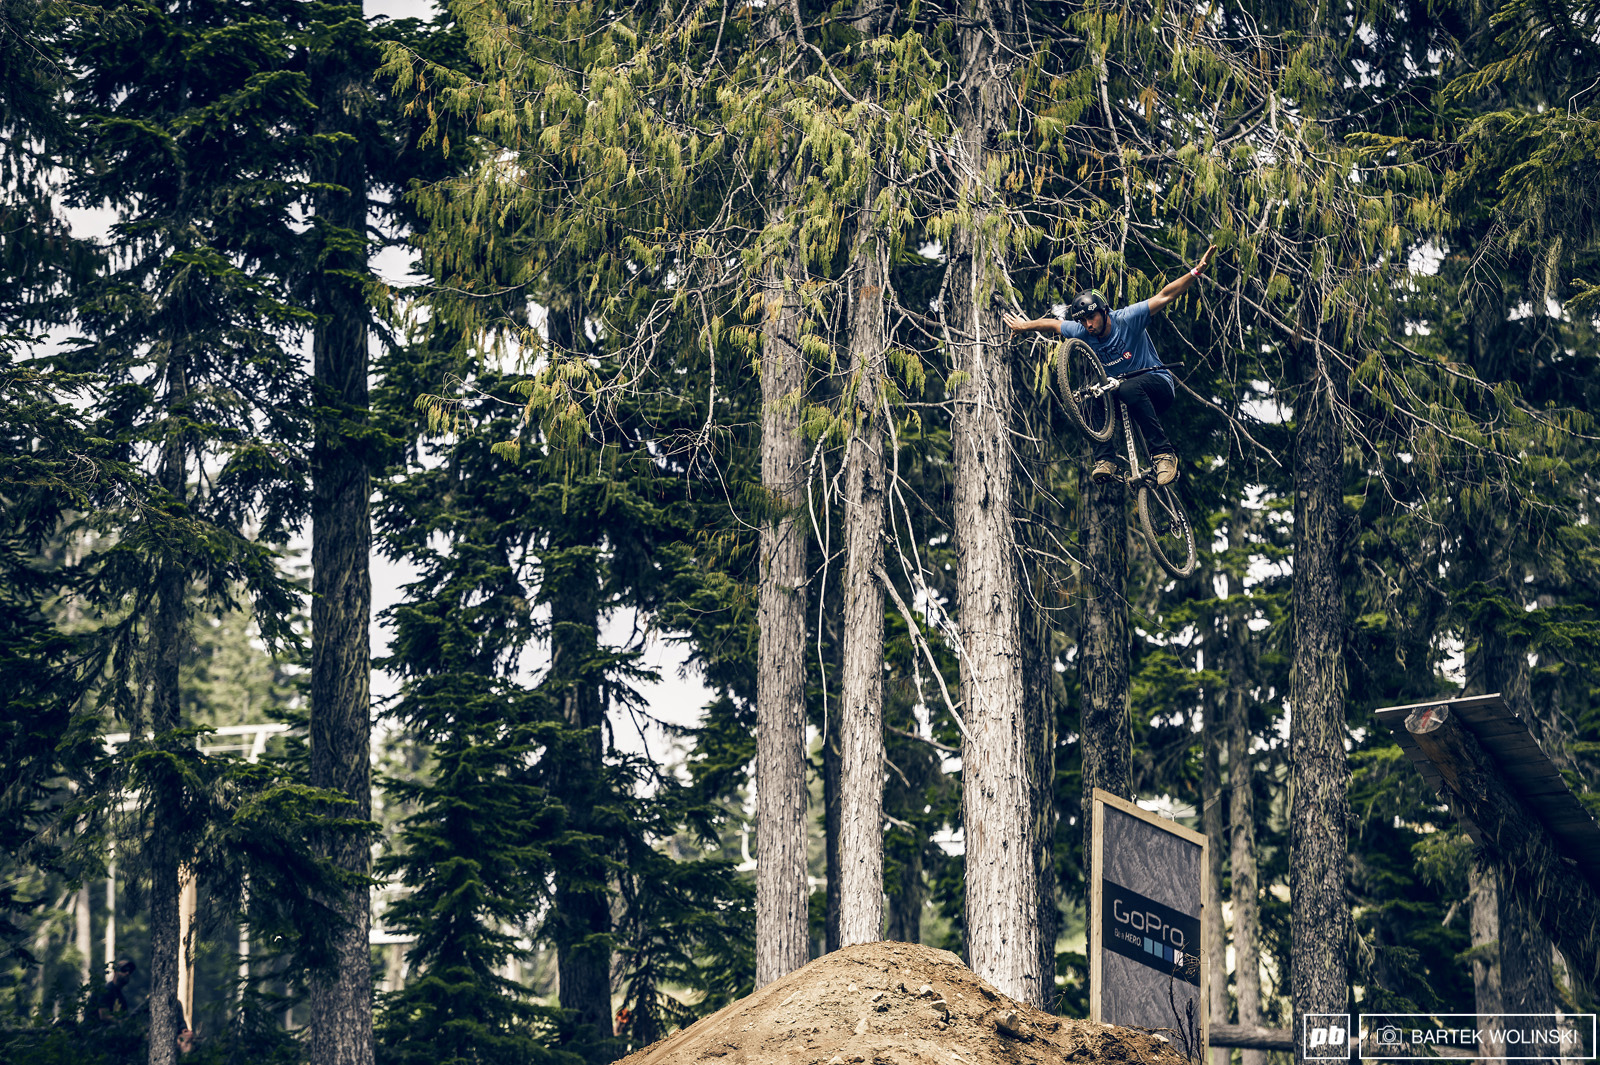 Sam Reynolds missed his luck a bit at the Vancouver Island but still menaged to get the crowd hyped.